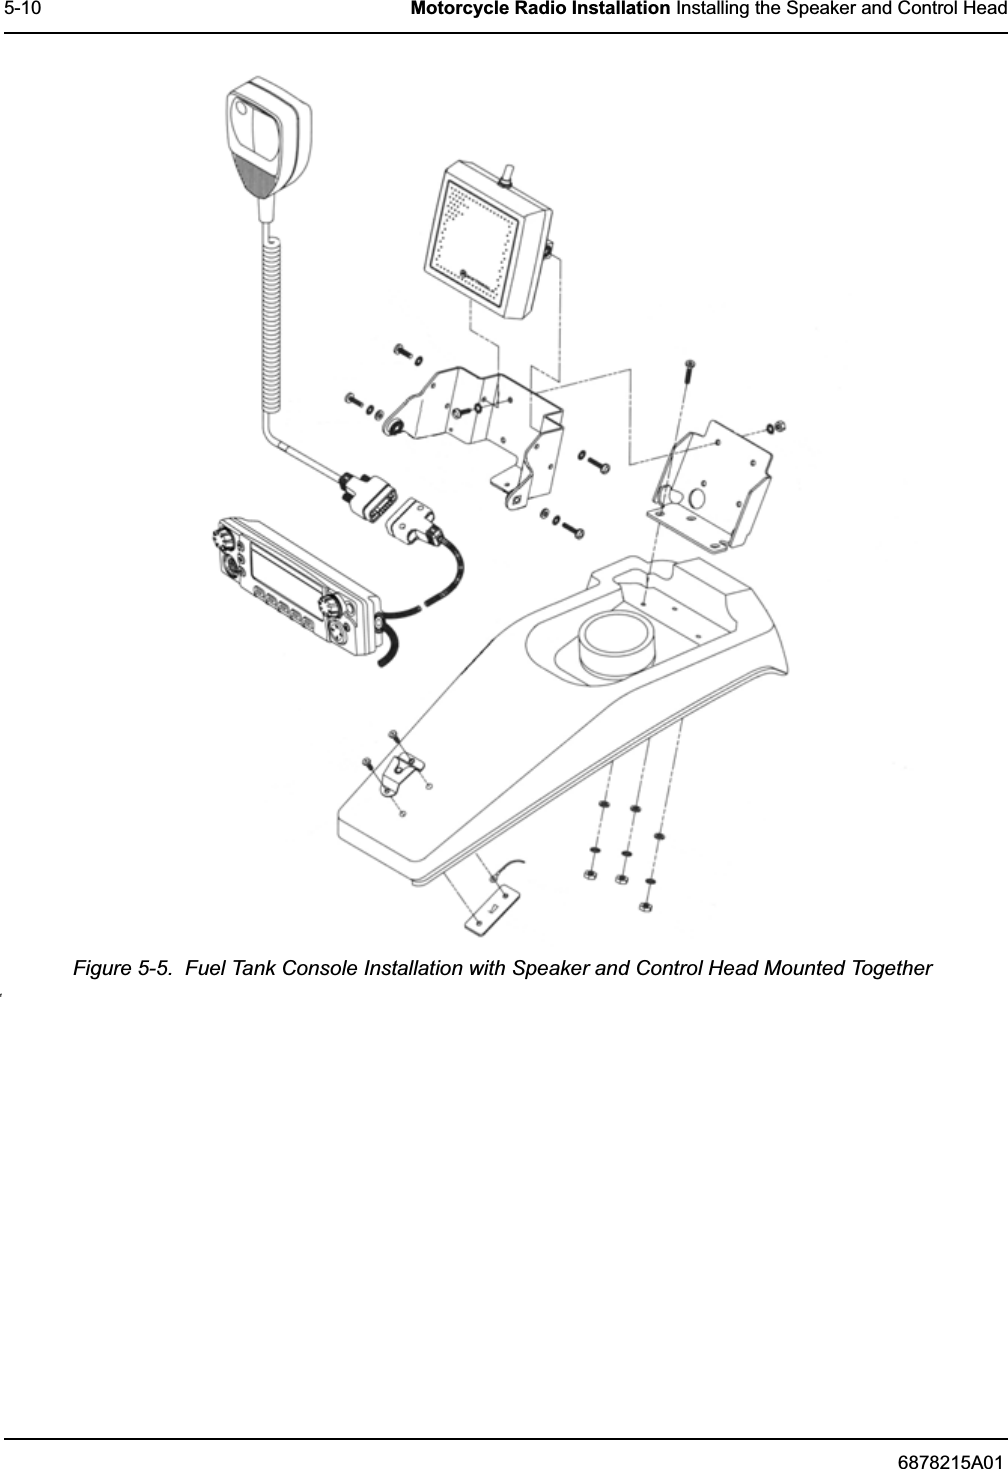 6878215A015-10 Motorcycle Radio Installation Installing the Speaker and Control HeadFigure 5-5.  Fuel Tank Console Installation with Speaker and Control Head Mounted Togetherf